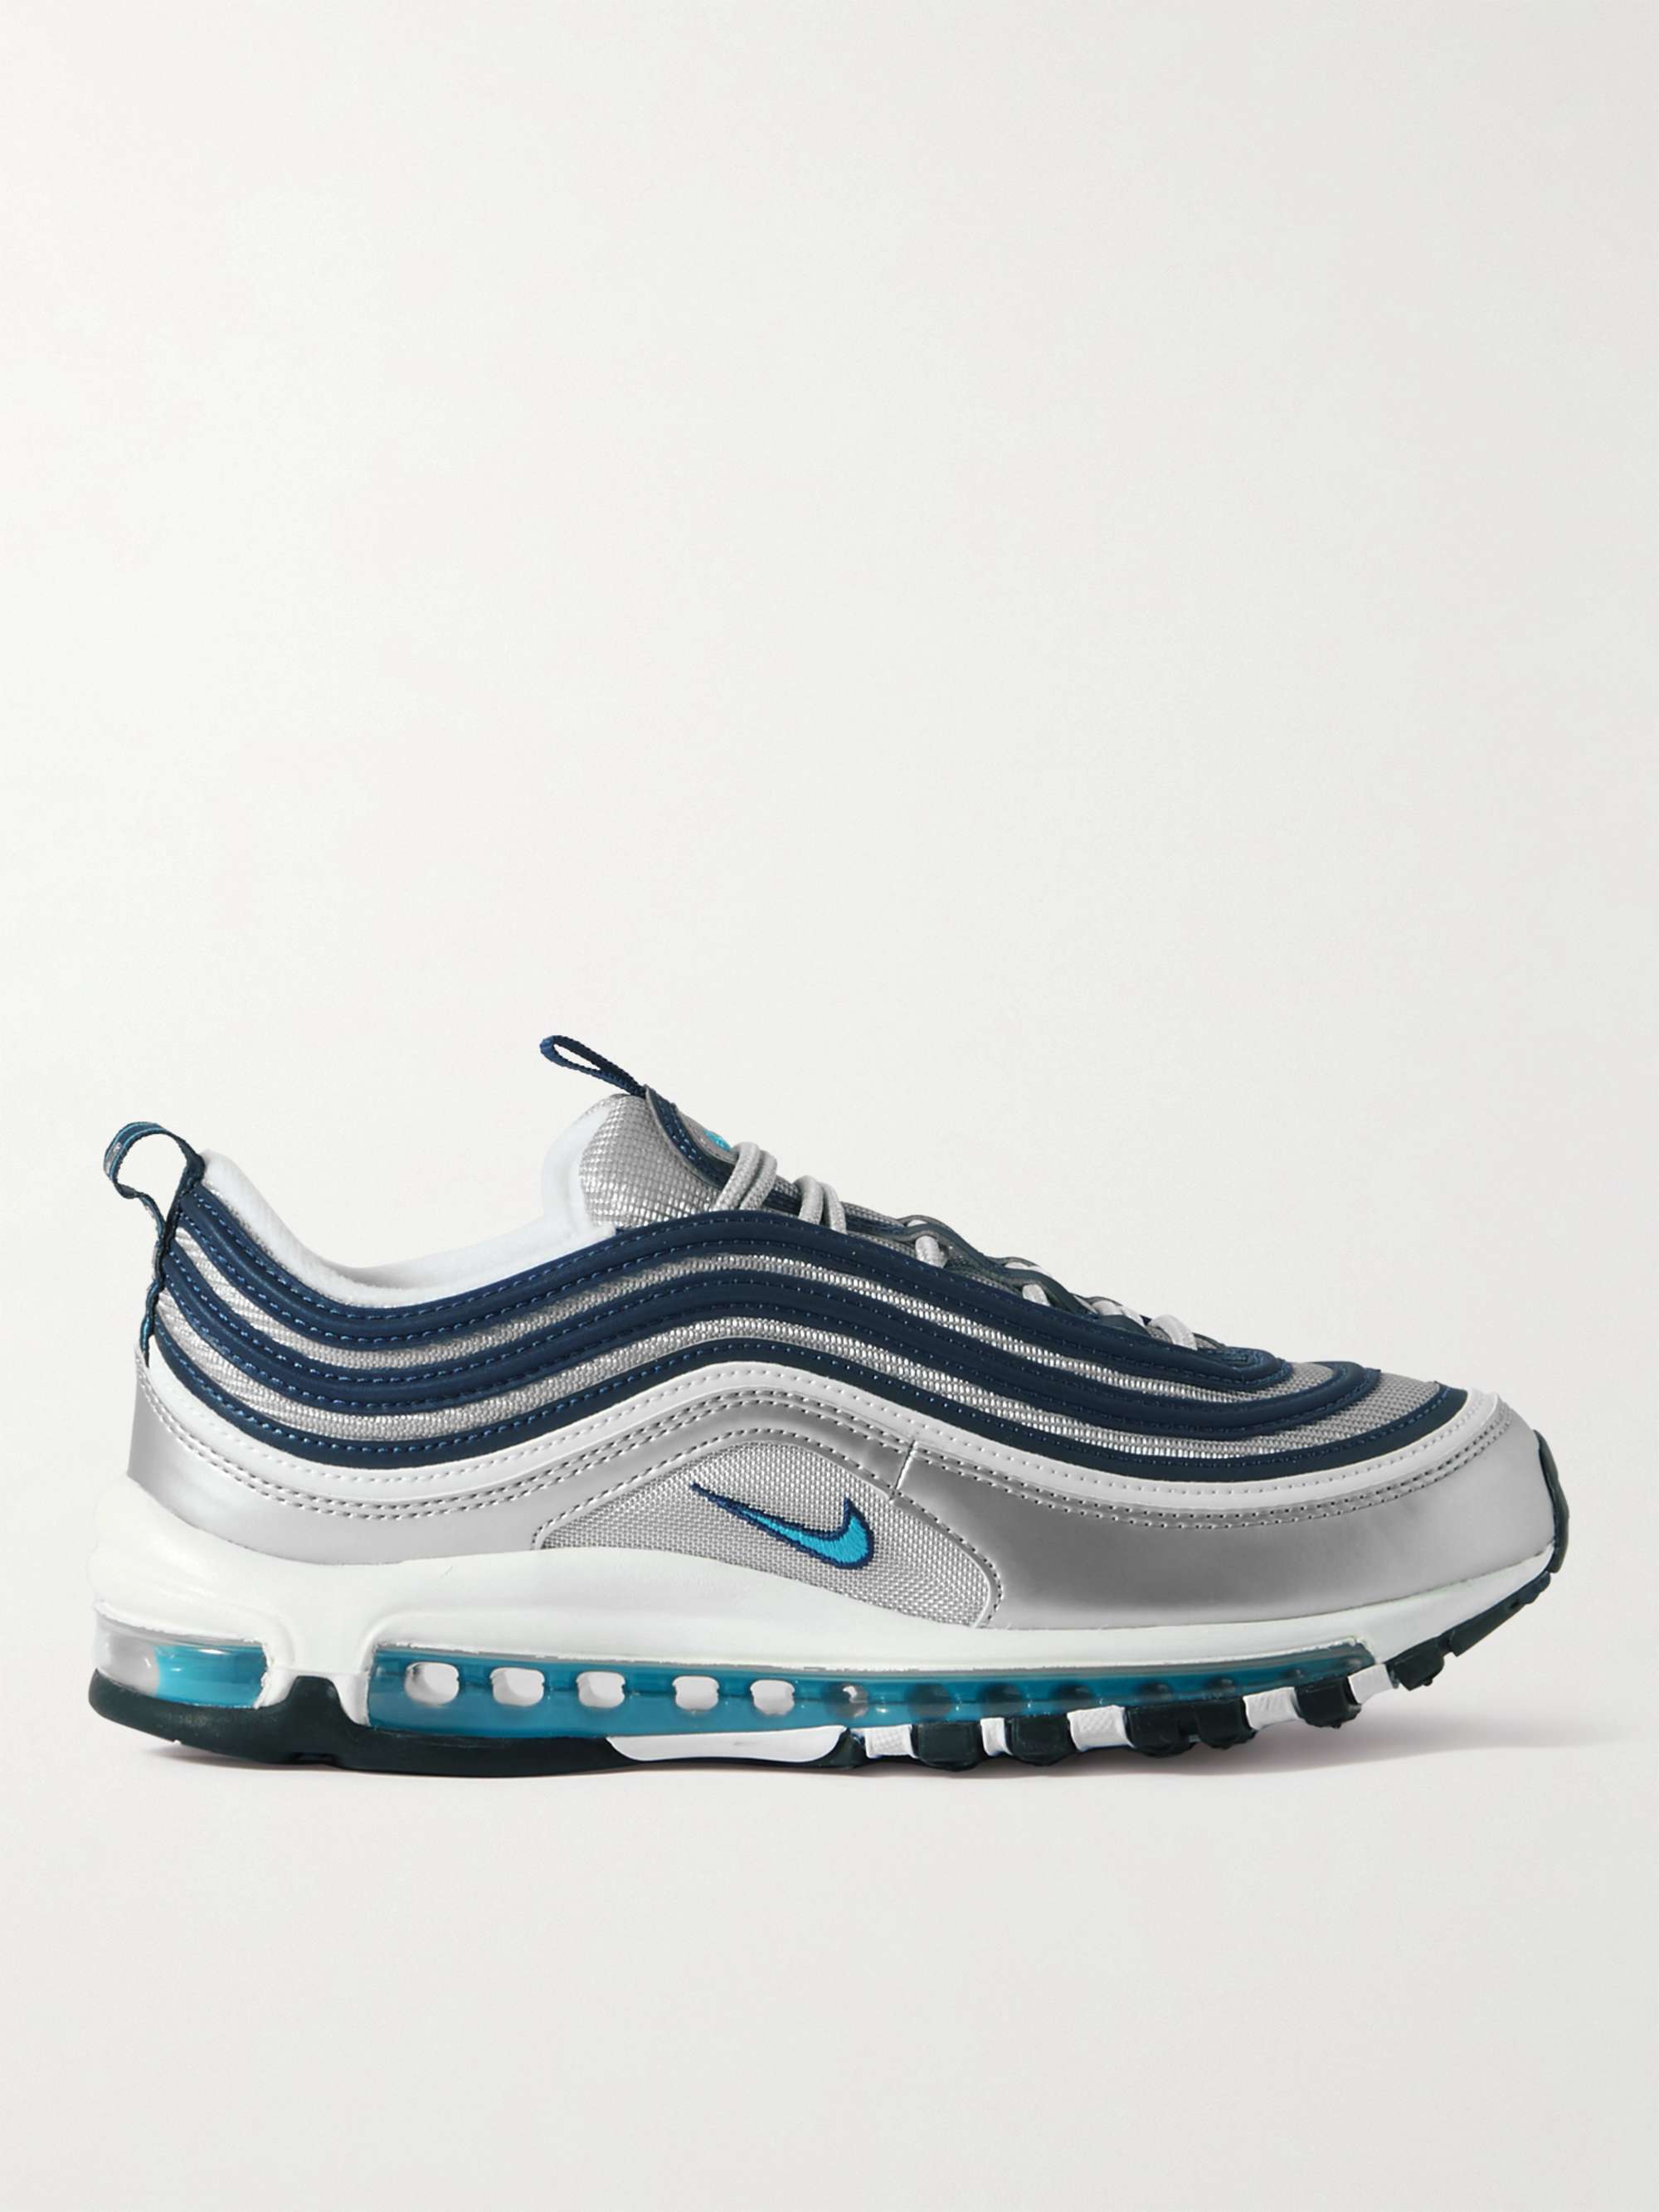 NIKE Air Max 97 Leather and Mesh Sneakers | MR PORTER